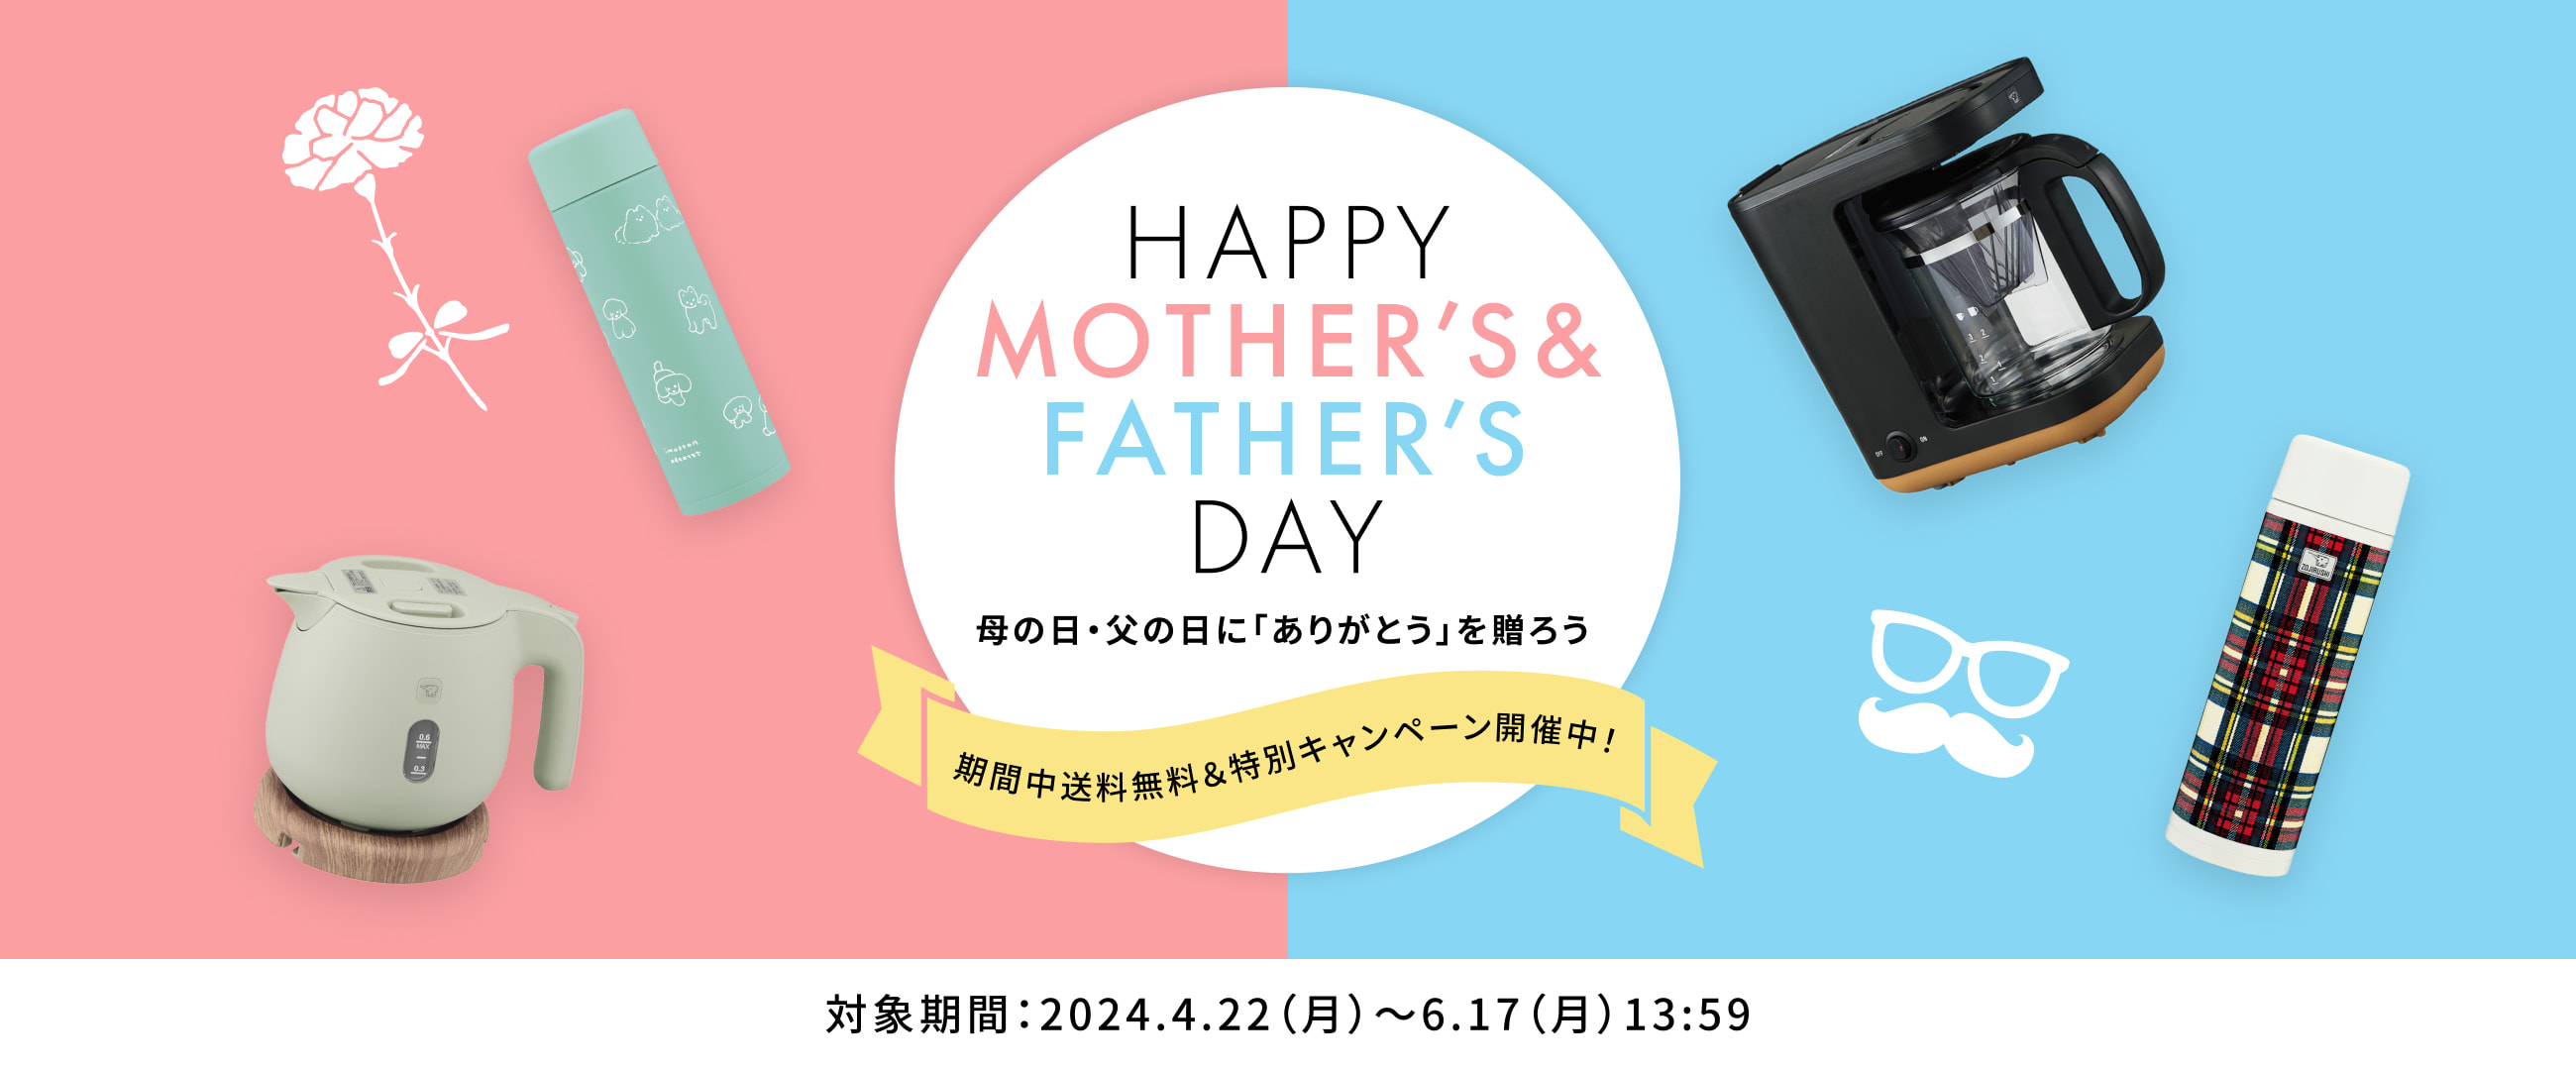 HAPPY MOTHER'S & FATHER'S DAY 母の日・父の日に「ありがとう」を贈ろう 【期間限定キャンペーン開催中！】 ［対象期間：2024年4月22日（月）～6月17日（月）13:59まで］